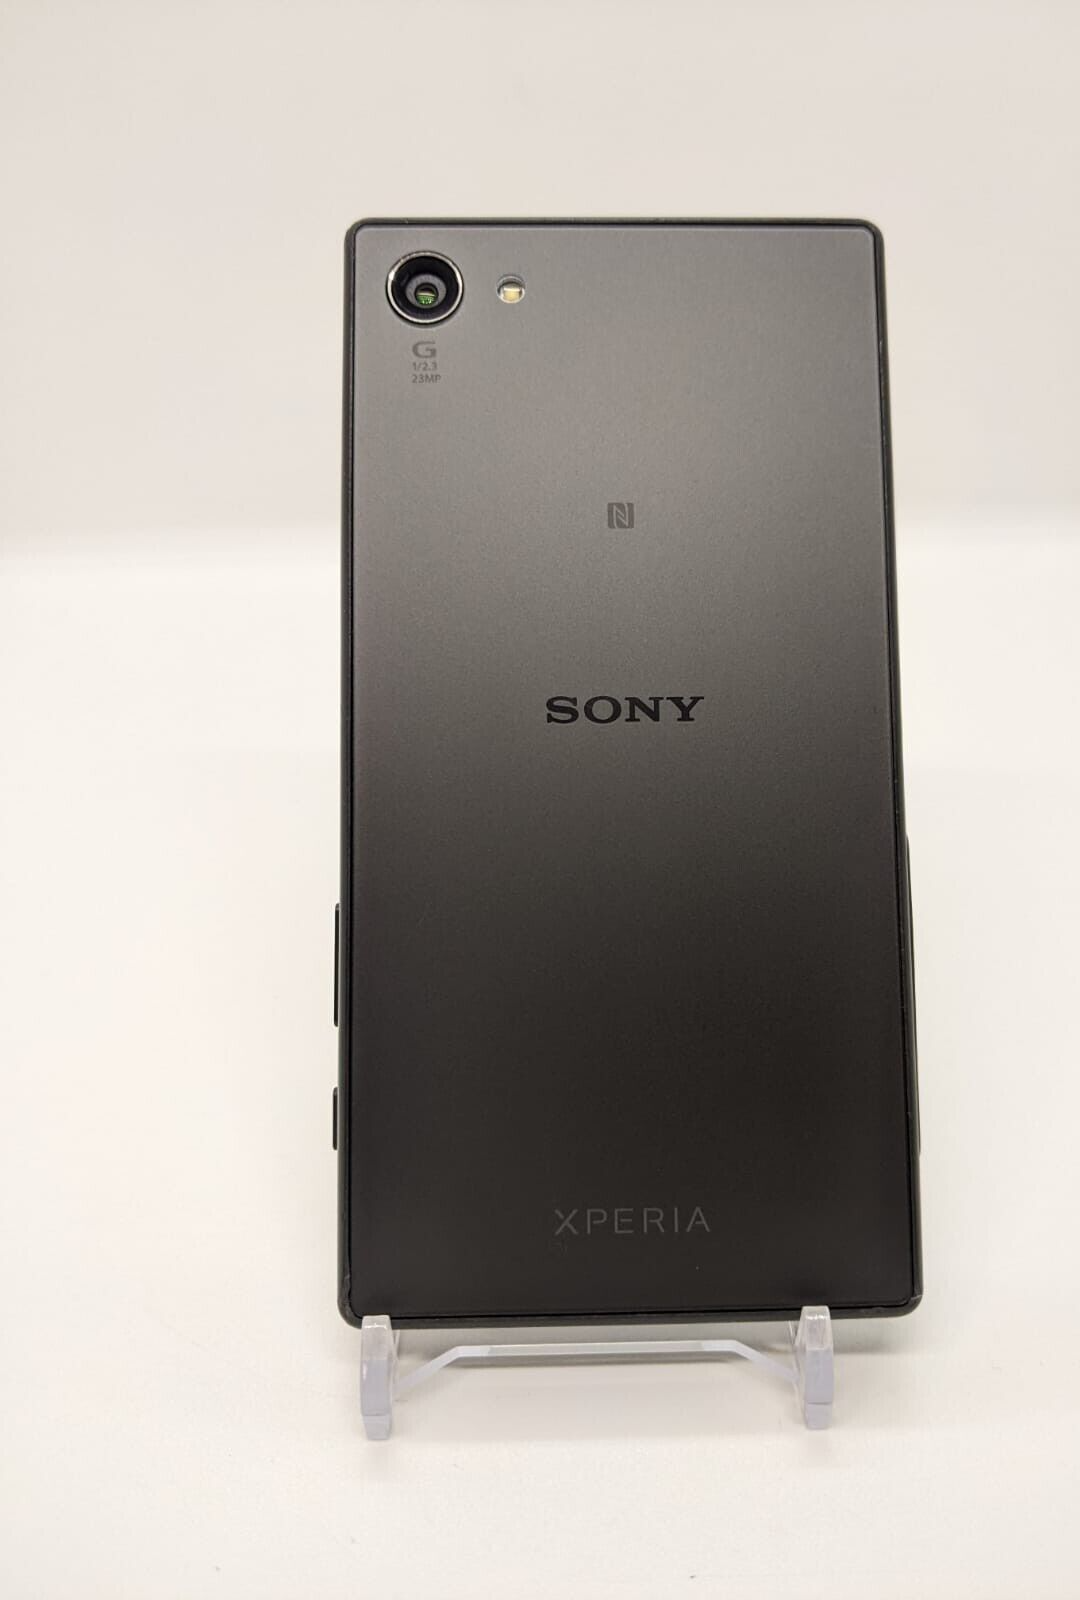 Sony Xperia Z5 Compact Unlocked 4G LTE Android Smartphone ES823